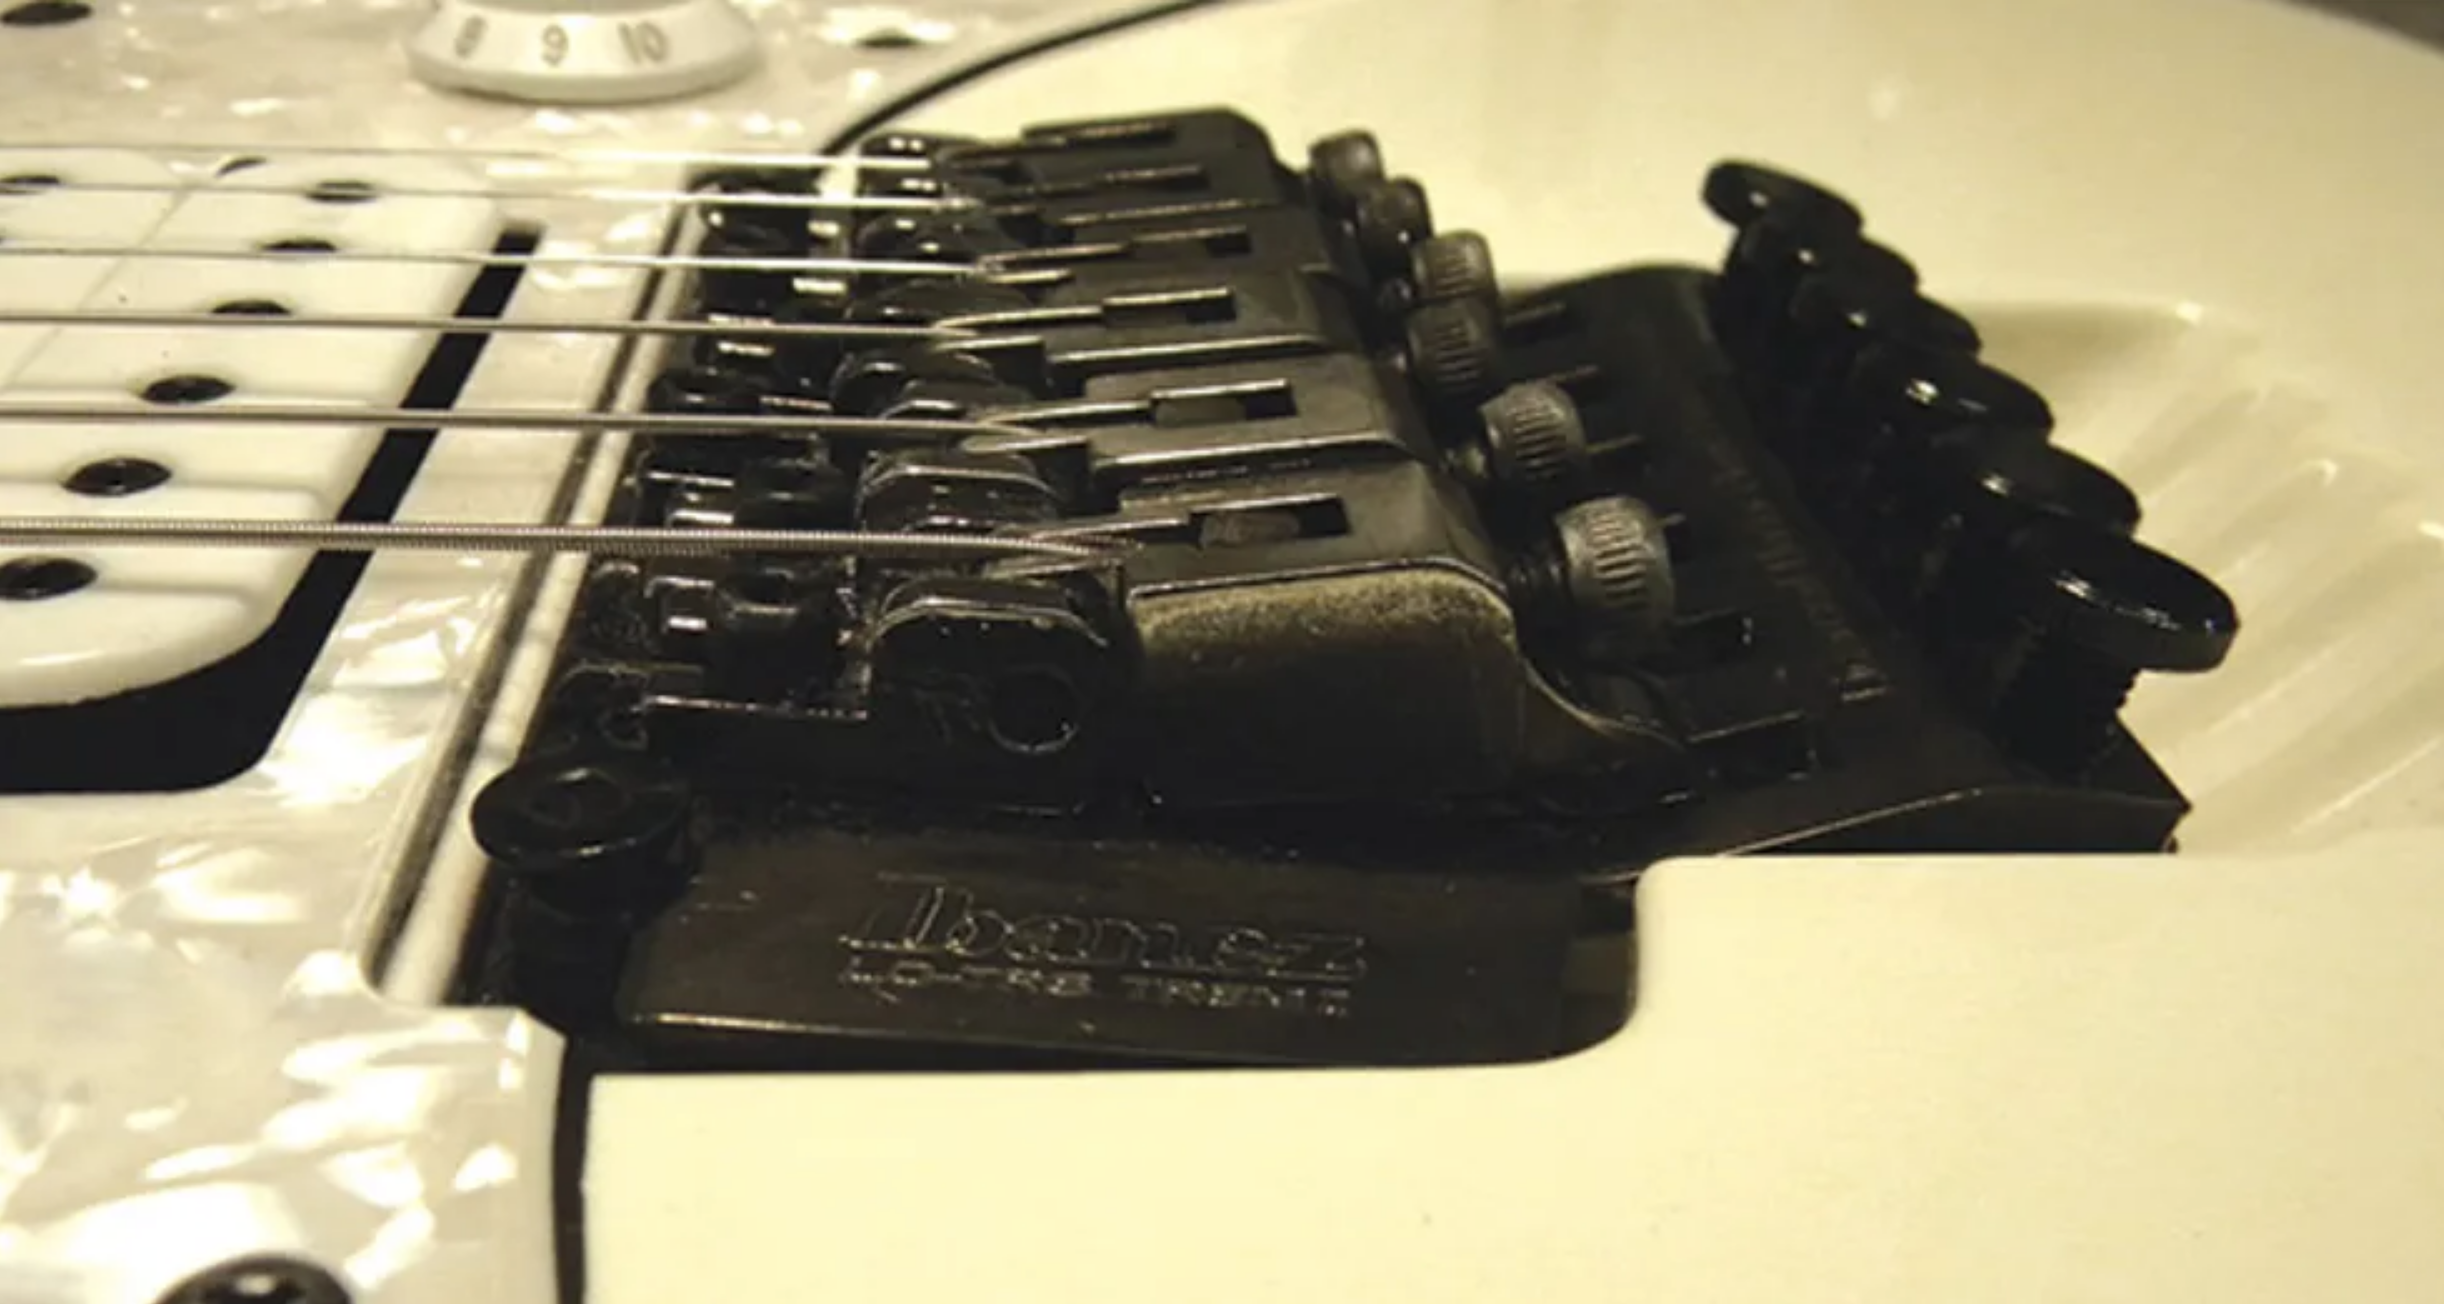 Guitar DIY: How to correctly restring your Floyd Rose vibrato